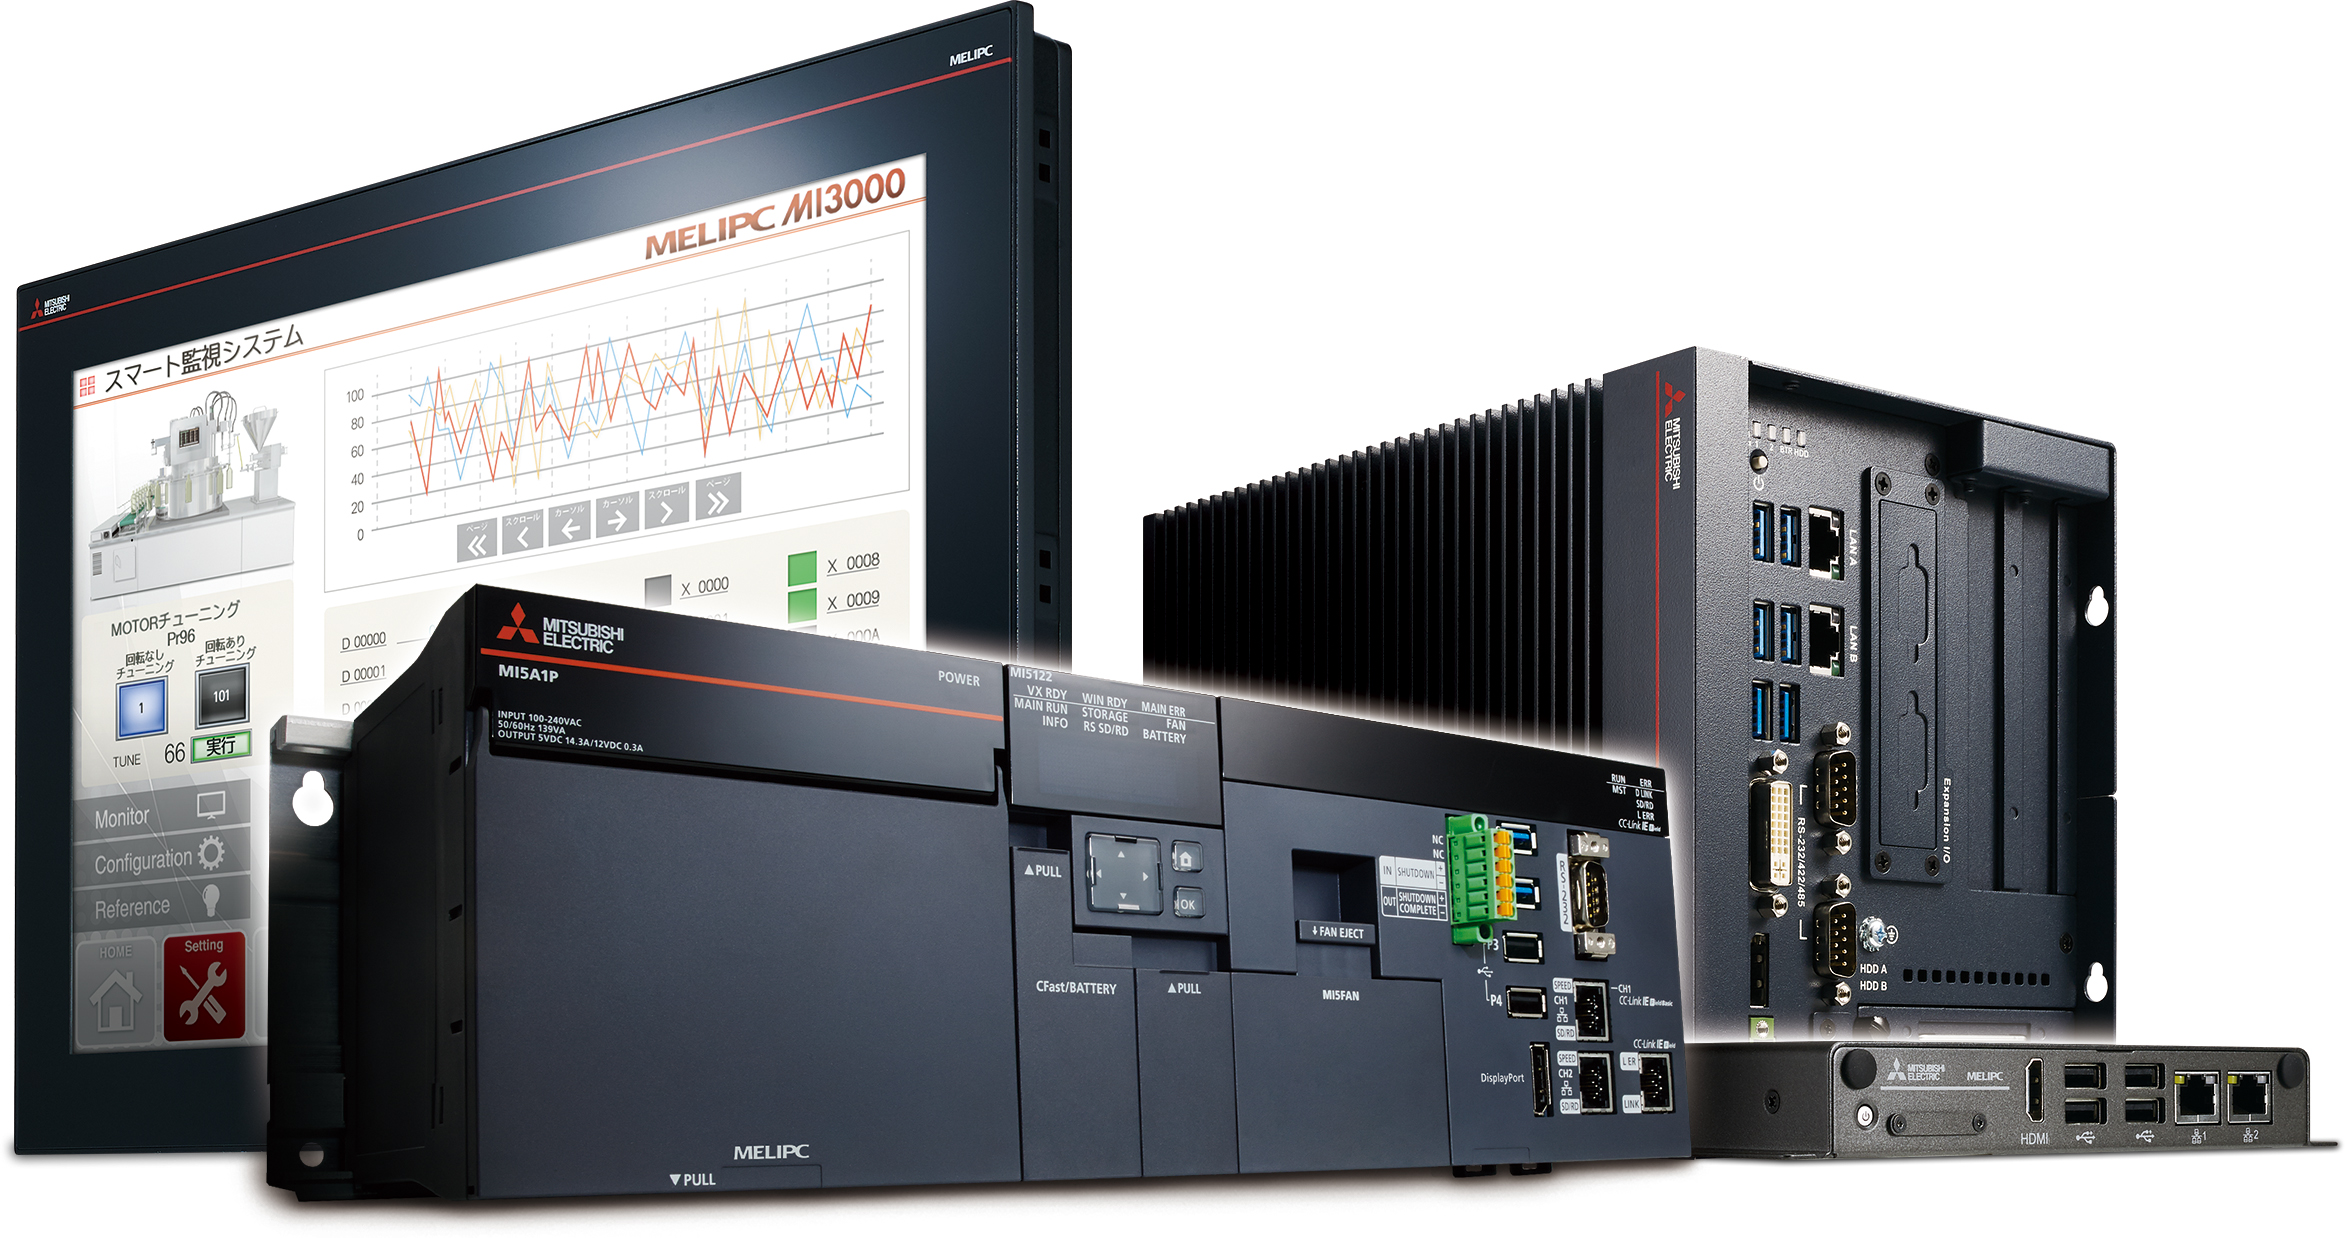 Mitsubishi Electric’s MELIPC Edge solution provides open connectivity, a suite of analytical tools and AI functionality, giving responses to process analysis in real time. [Source: Mitsubishi Electric Europe B.V.]